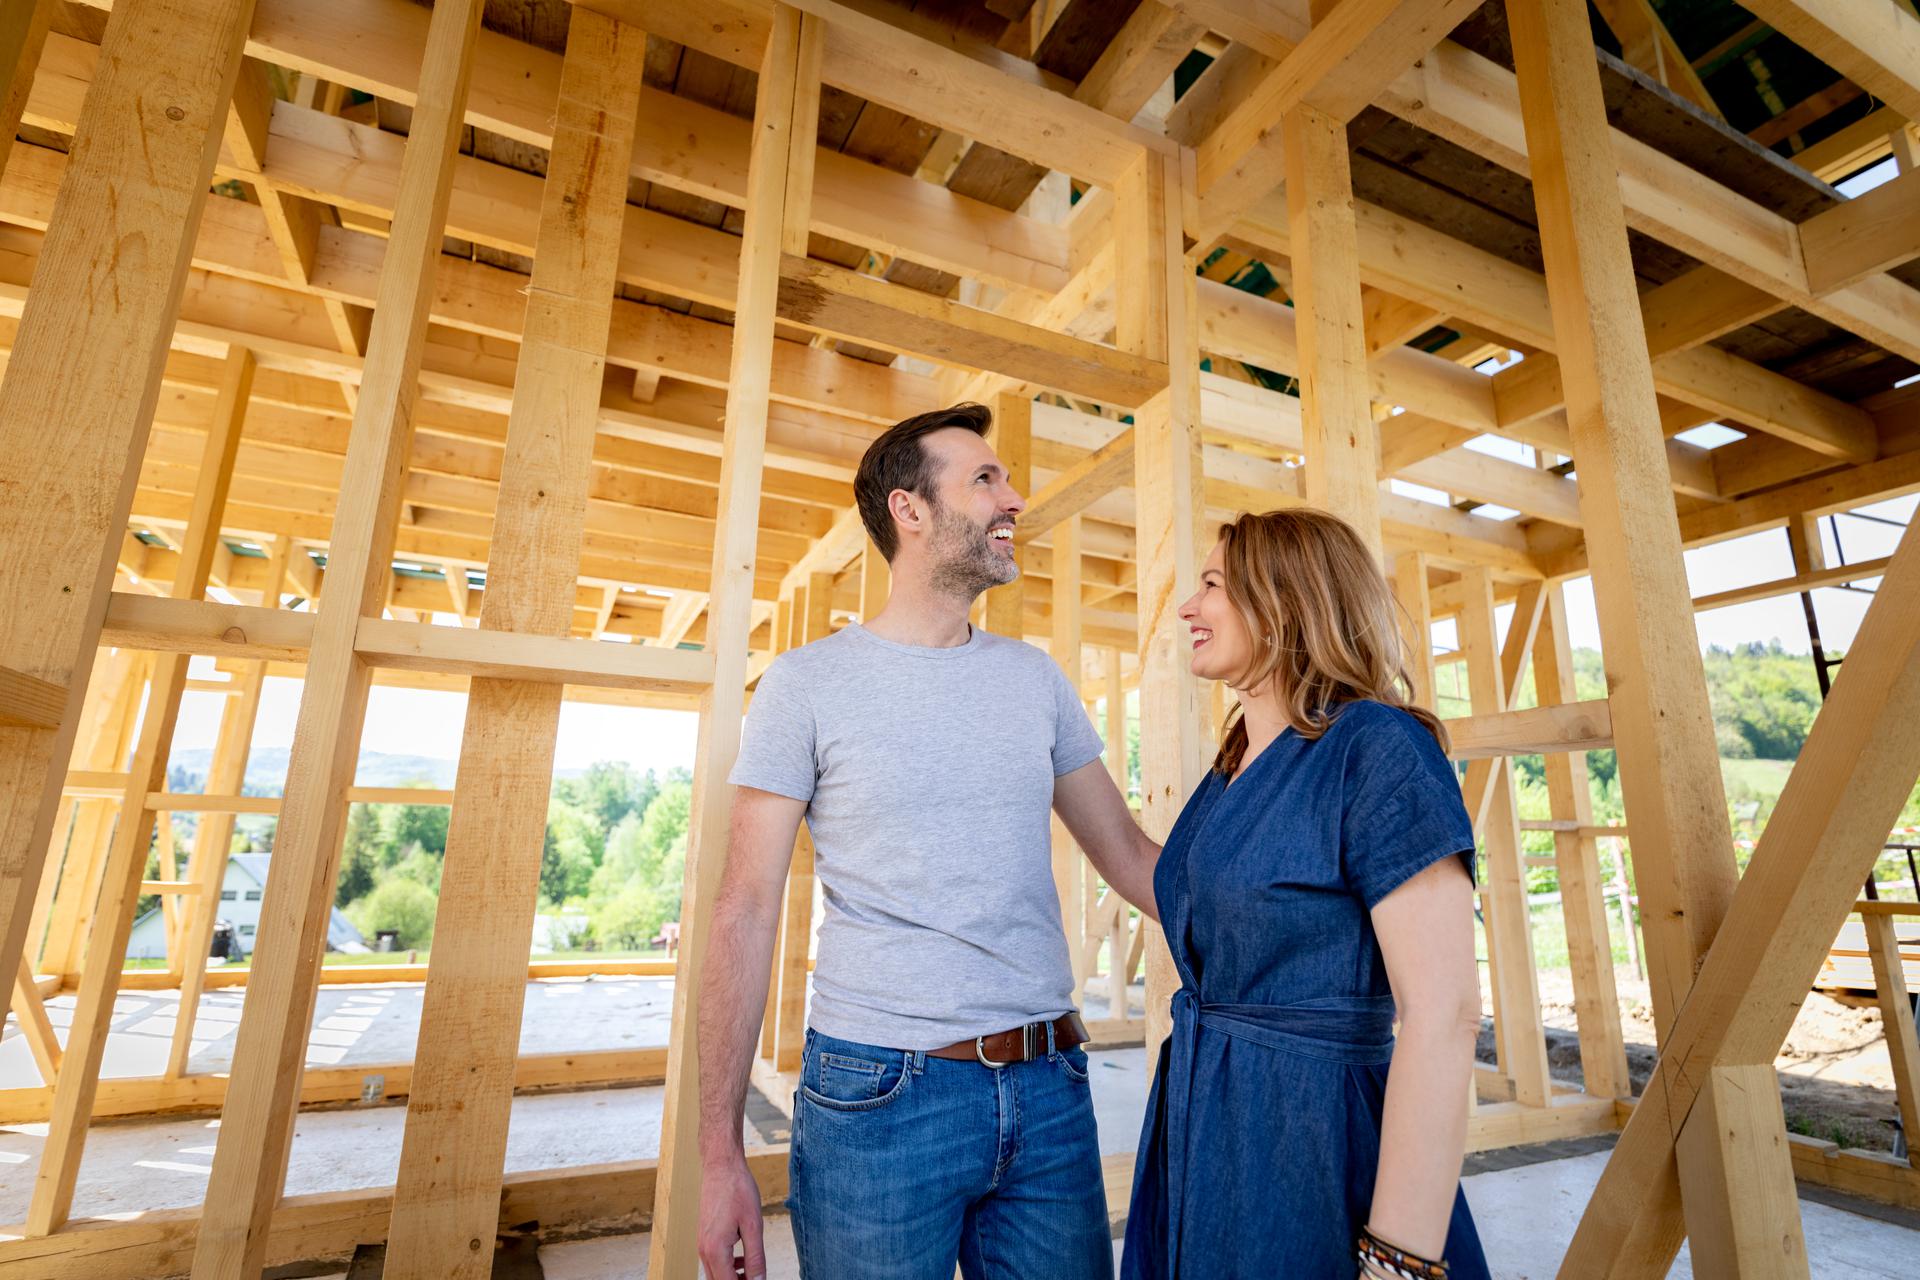 Caviness & Cates Lock in Your Mortgage Rate While You Build!